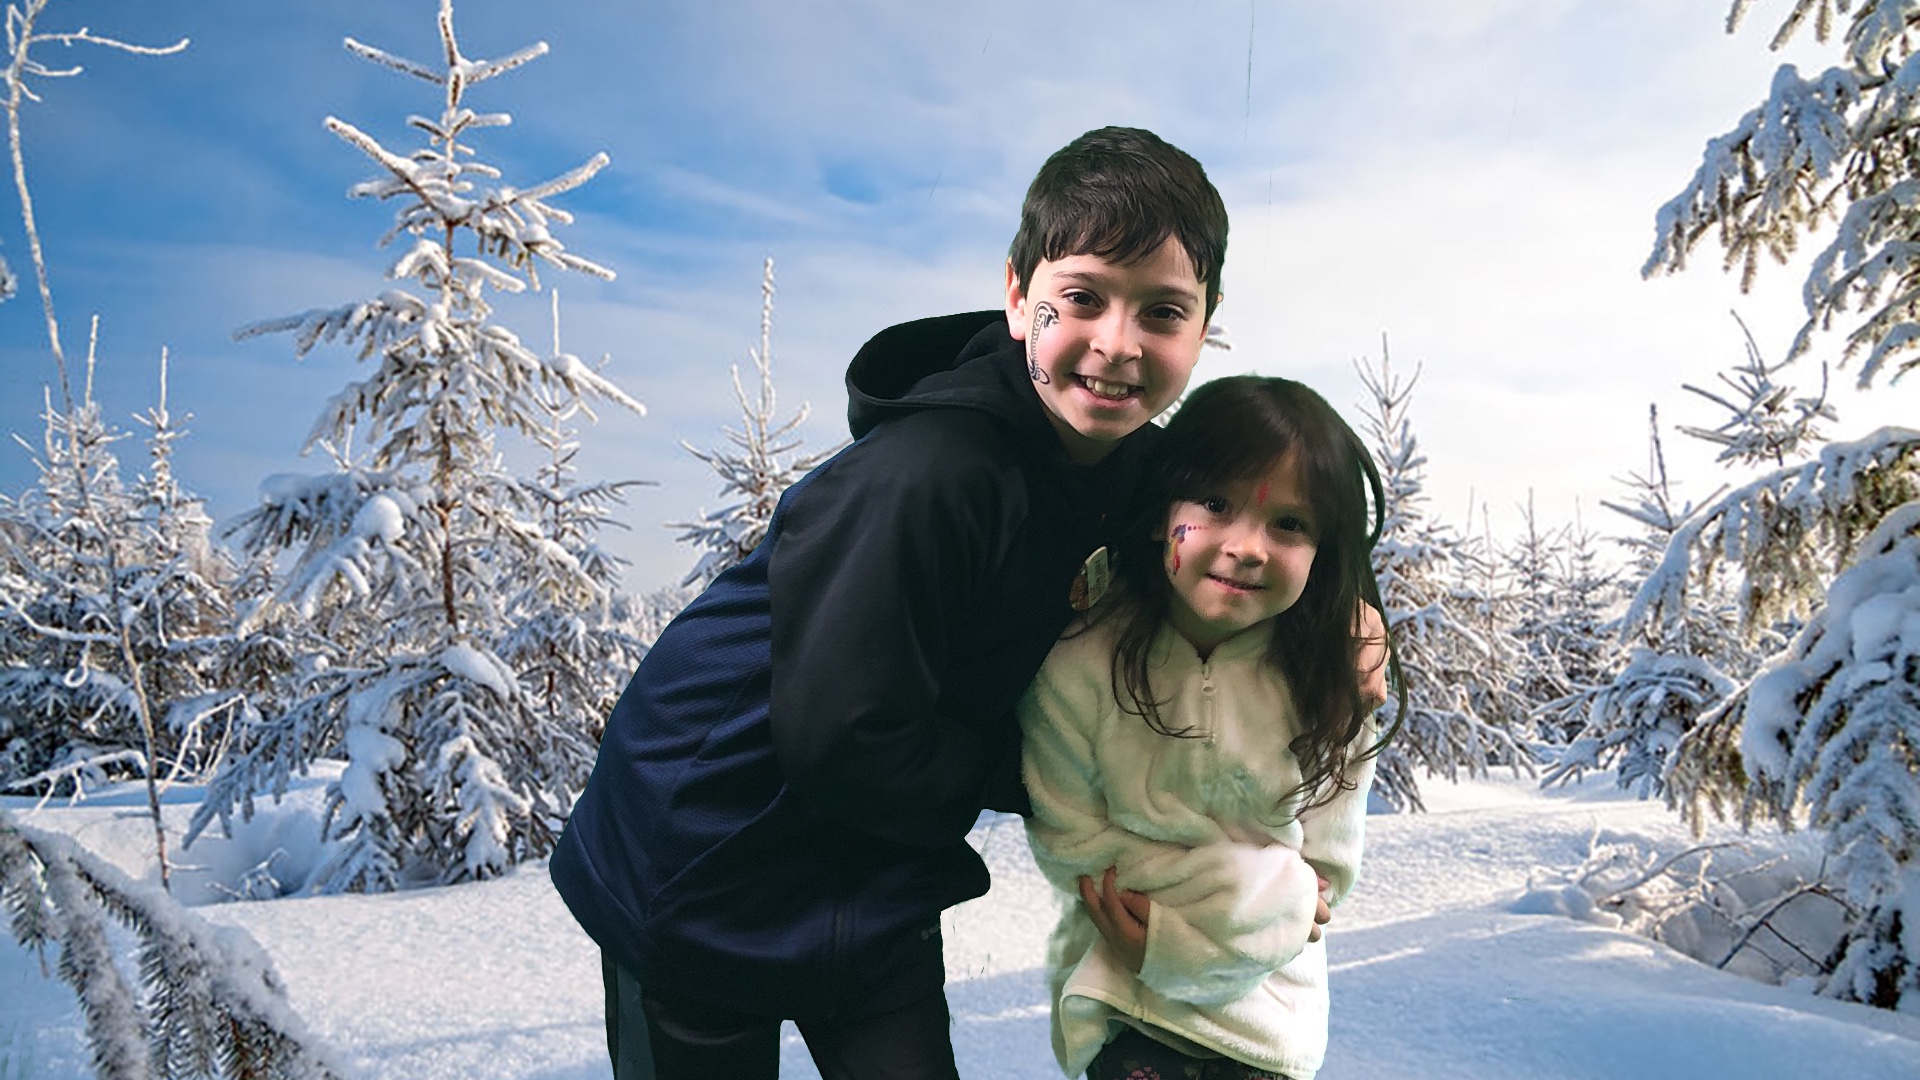 boy and girl standing in snow with snow covered trees in the background